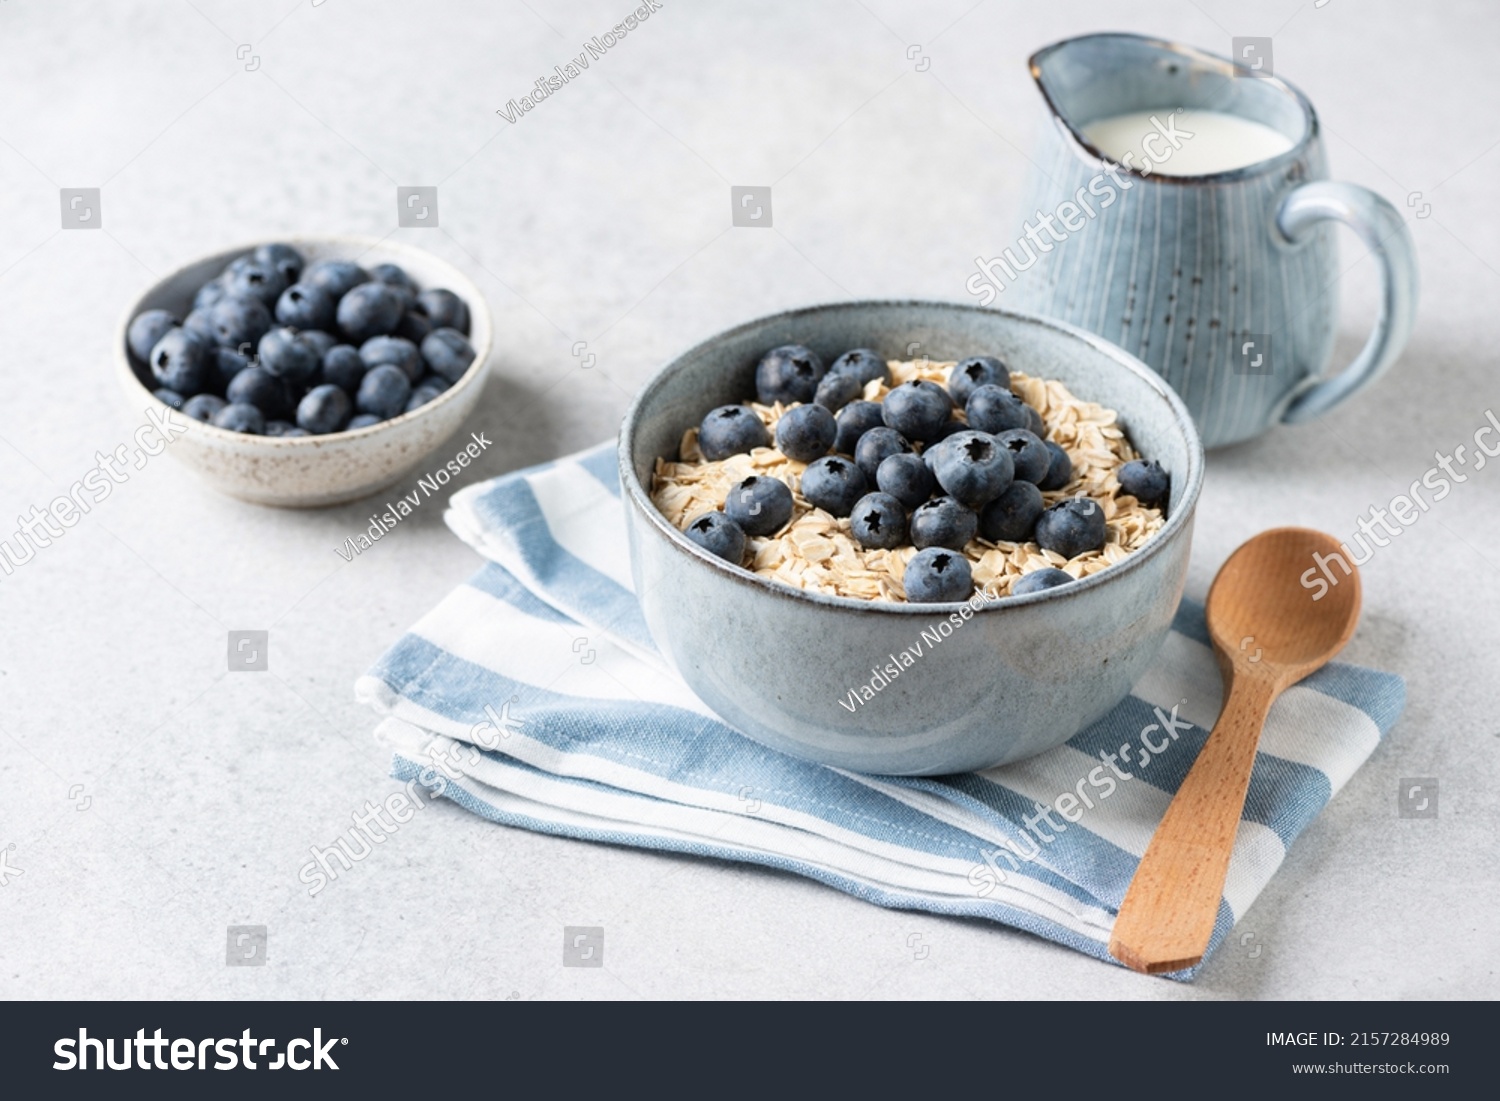 Uncooked oatmeal porridge with blueberries in bowl. Oat flakes, rolled oats. Breakfast meal concept #2157284989